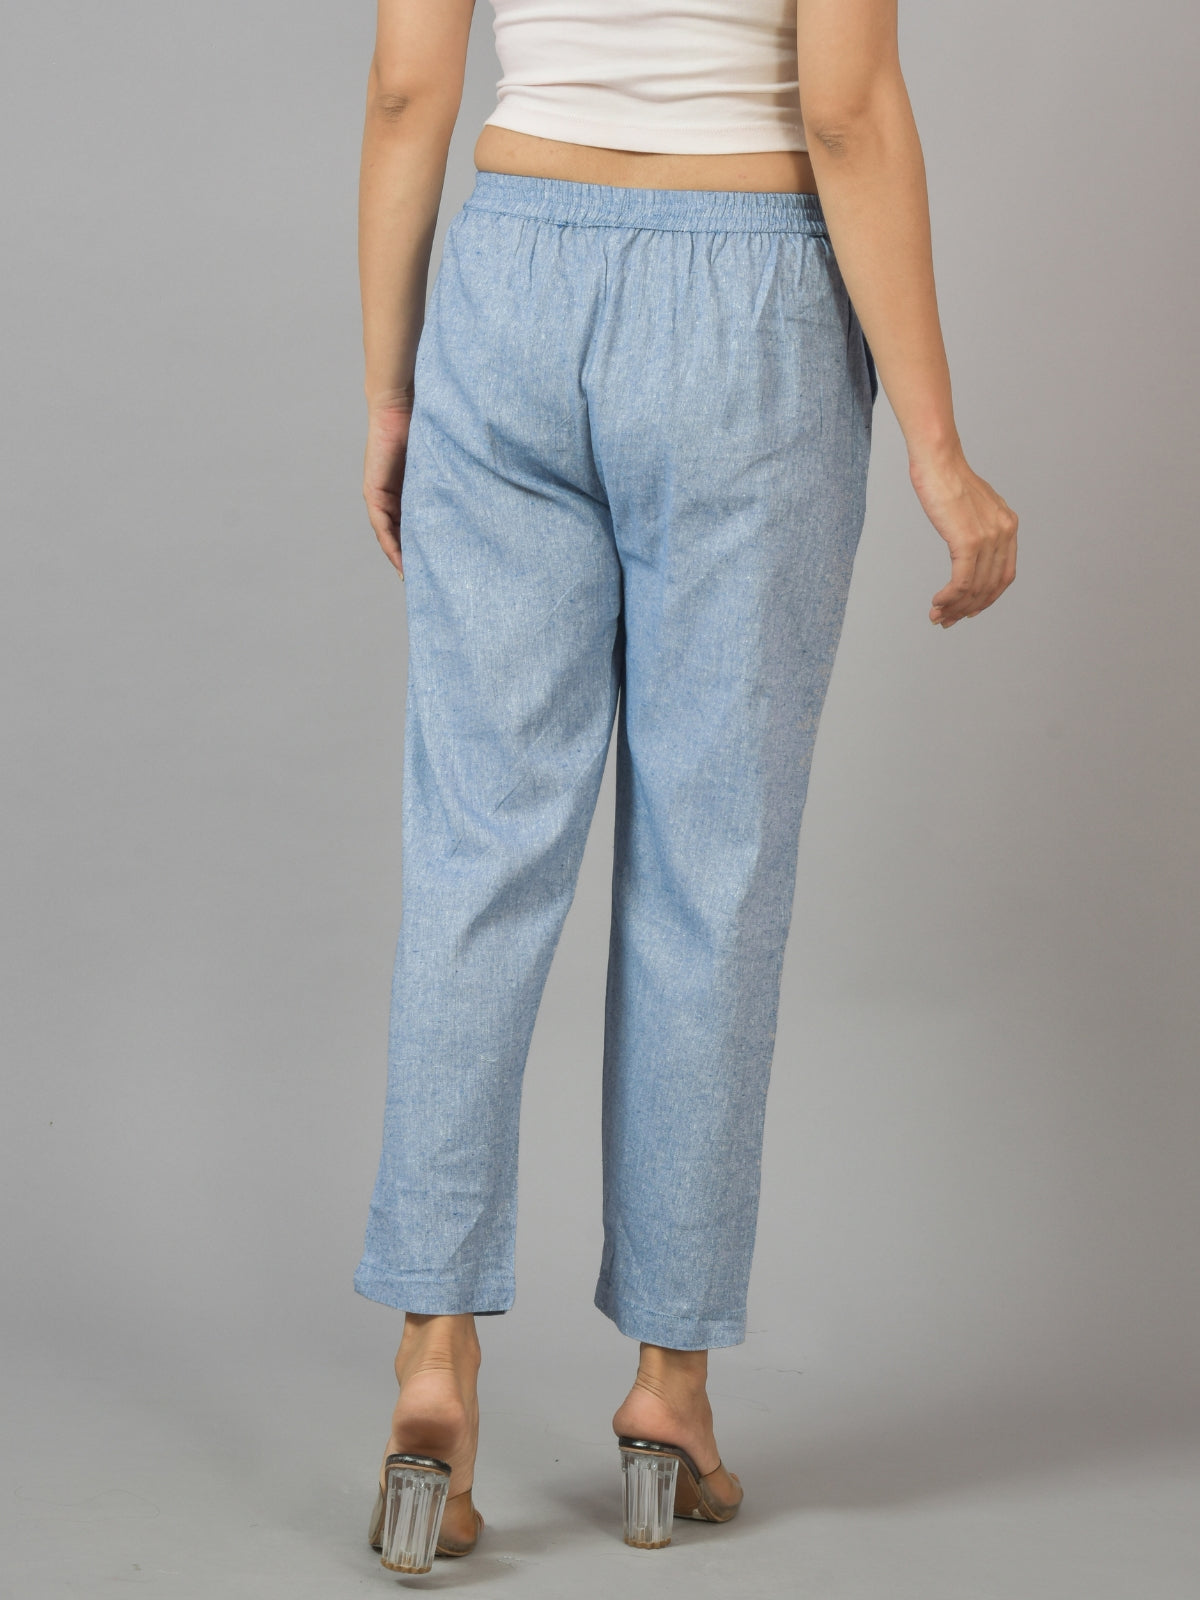 Pack Of 2 Womens Cement Grey and Denim Blue Fully Elastic Cotton Trousers